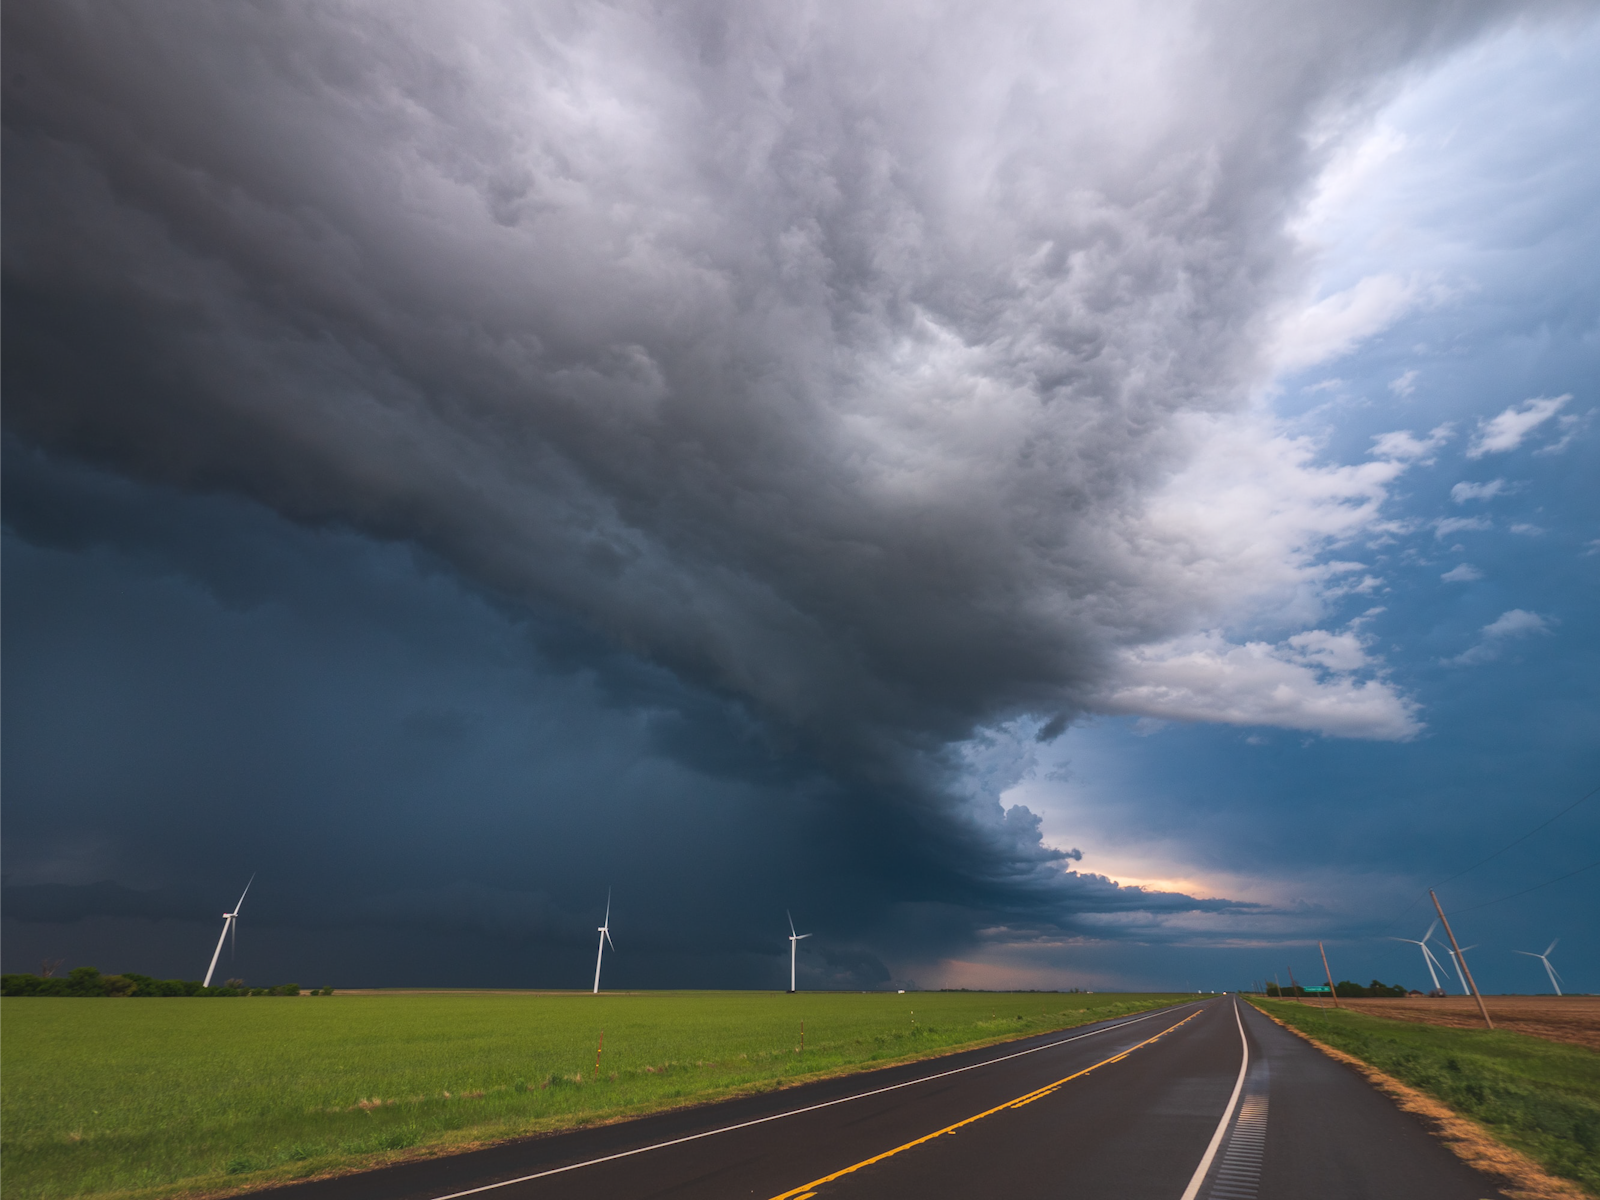 Photograph of a storm cloud over a road and windmills.